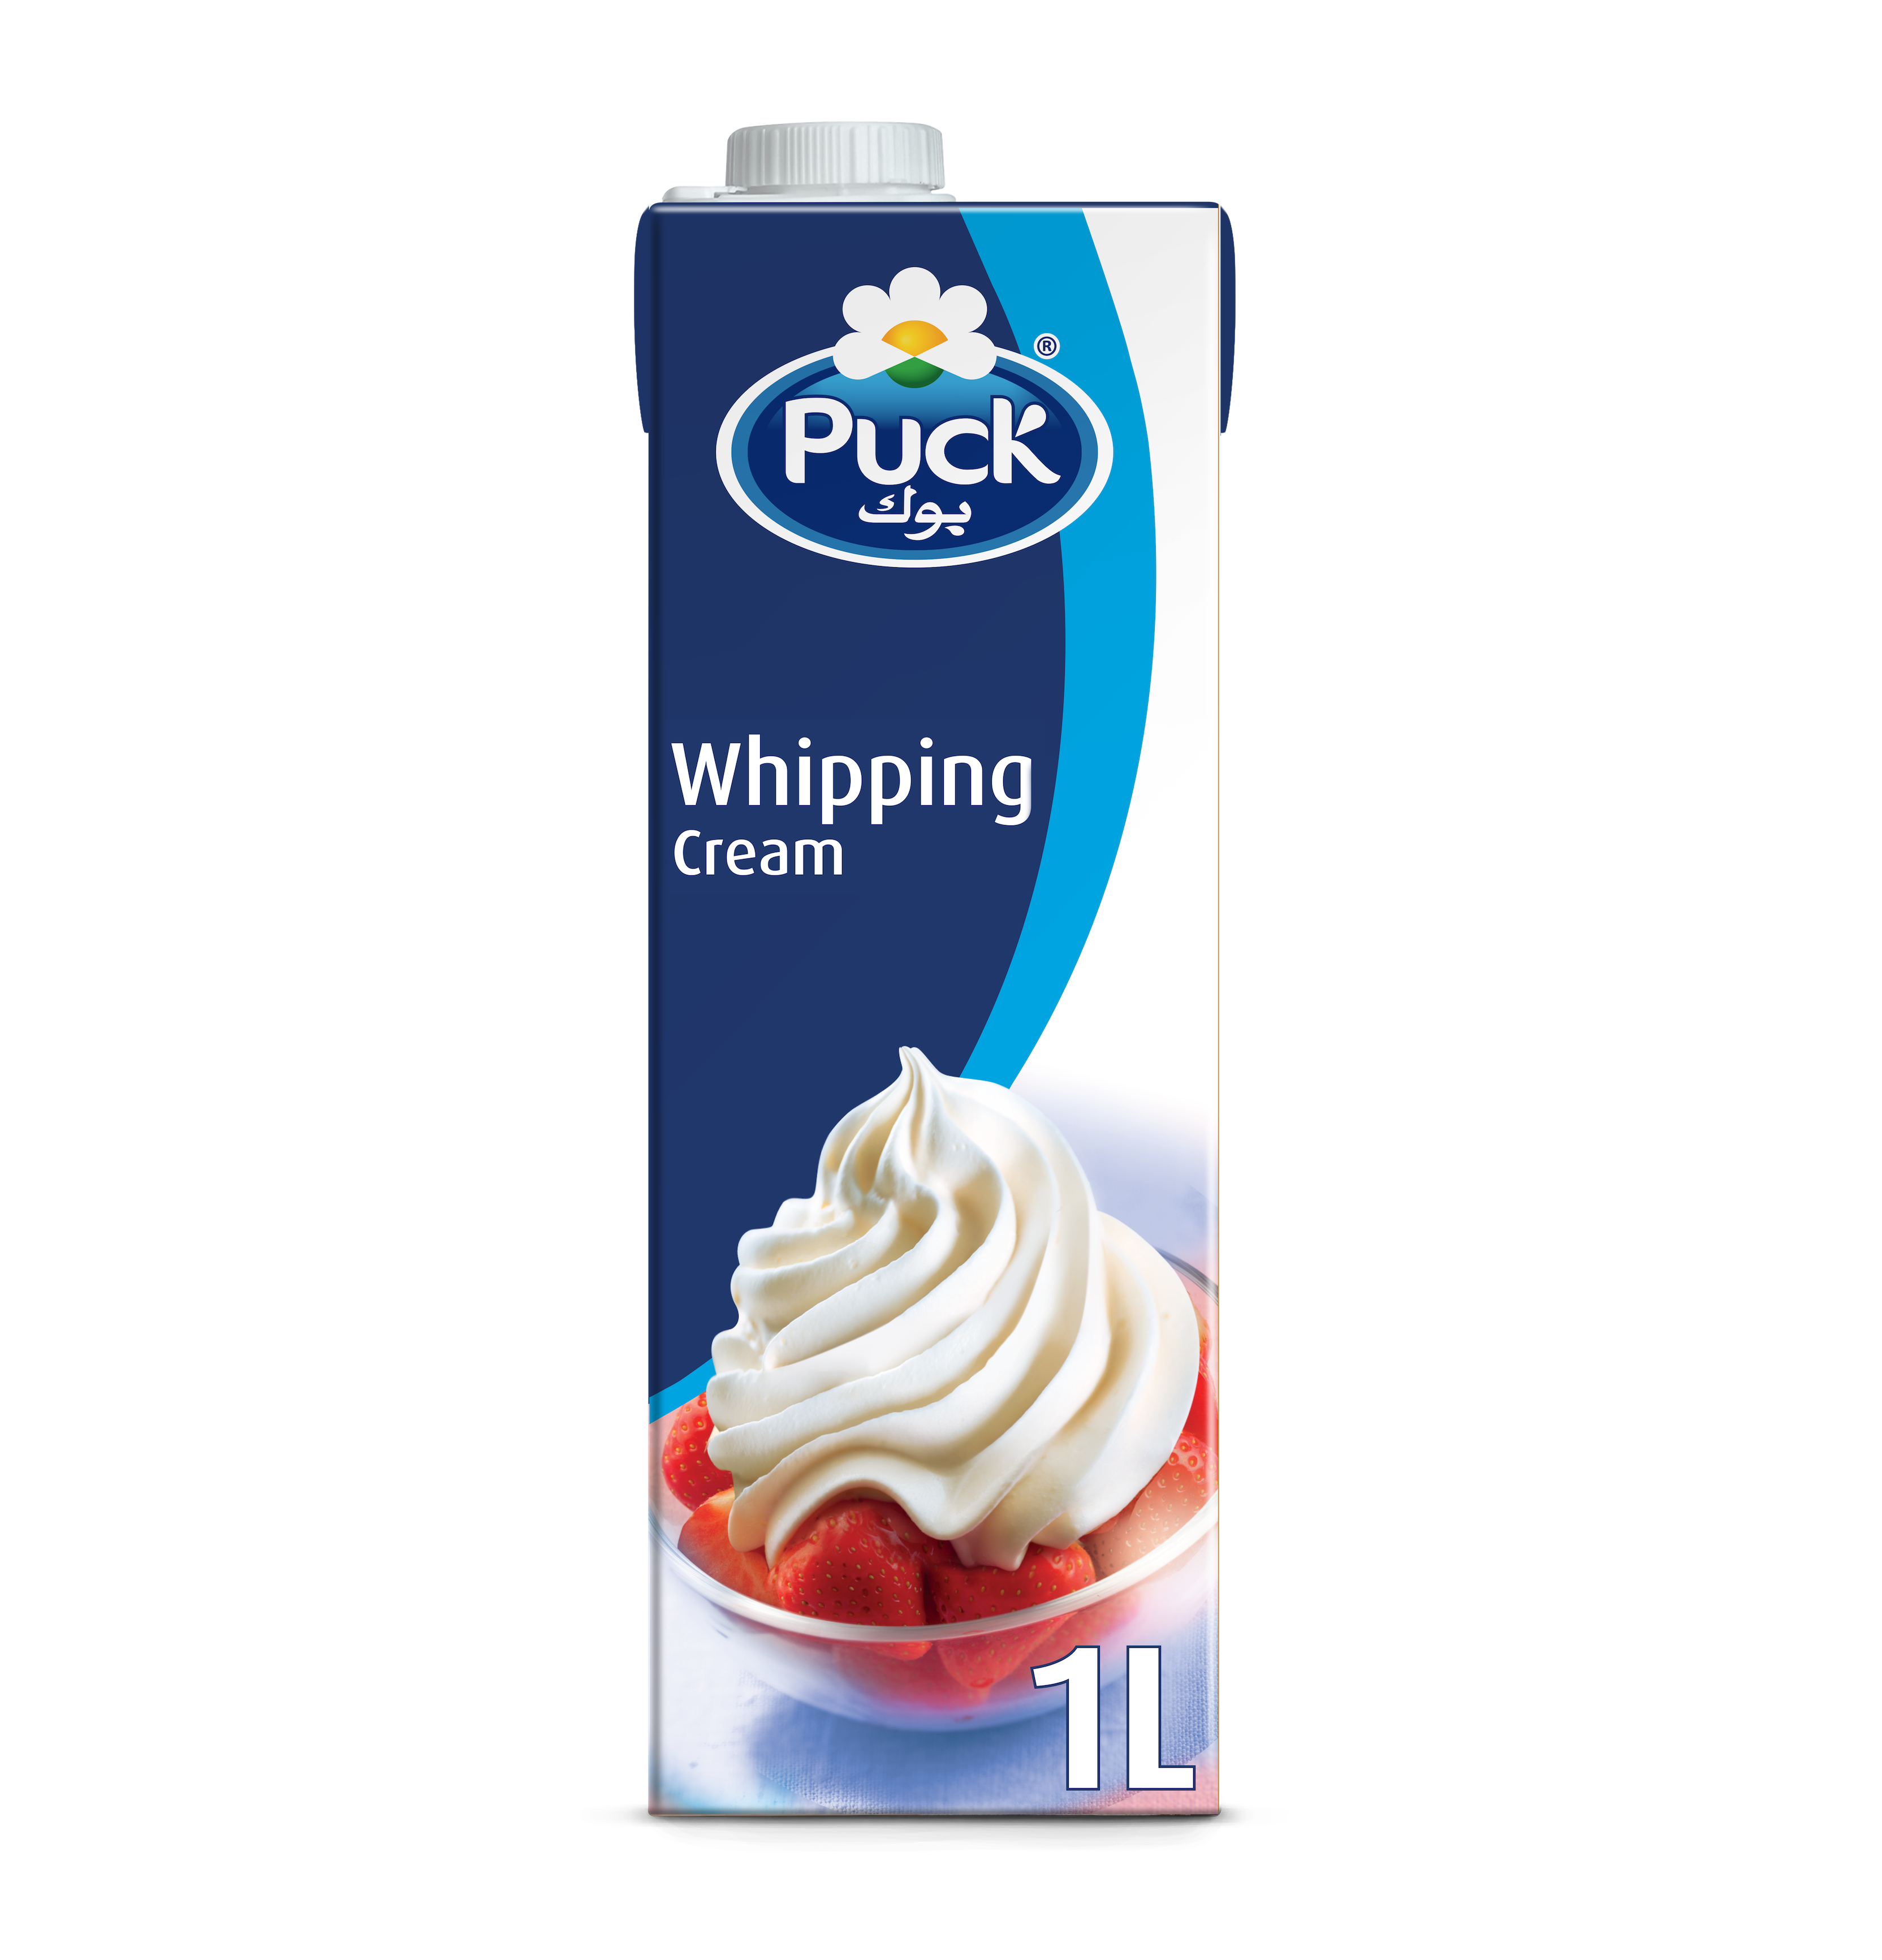 1 cup Puck® Whipping cream